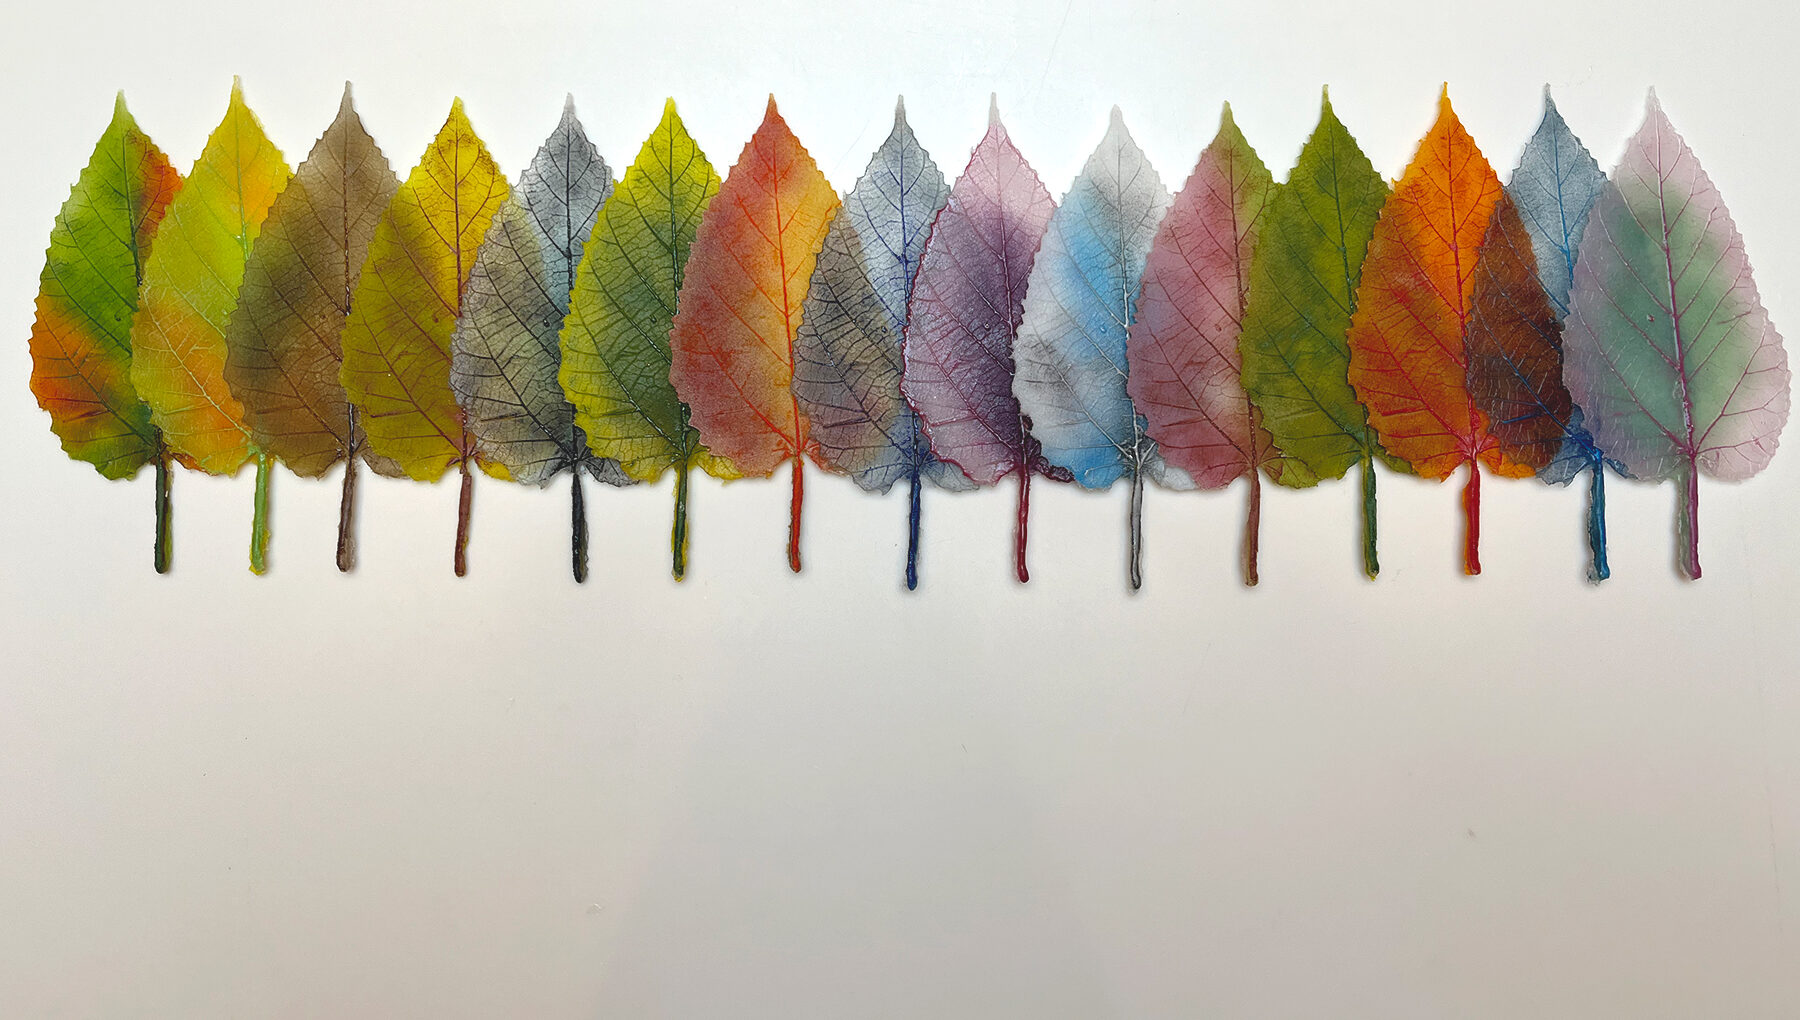 A rainbow of glass leaves